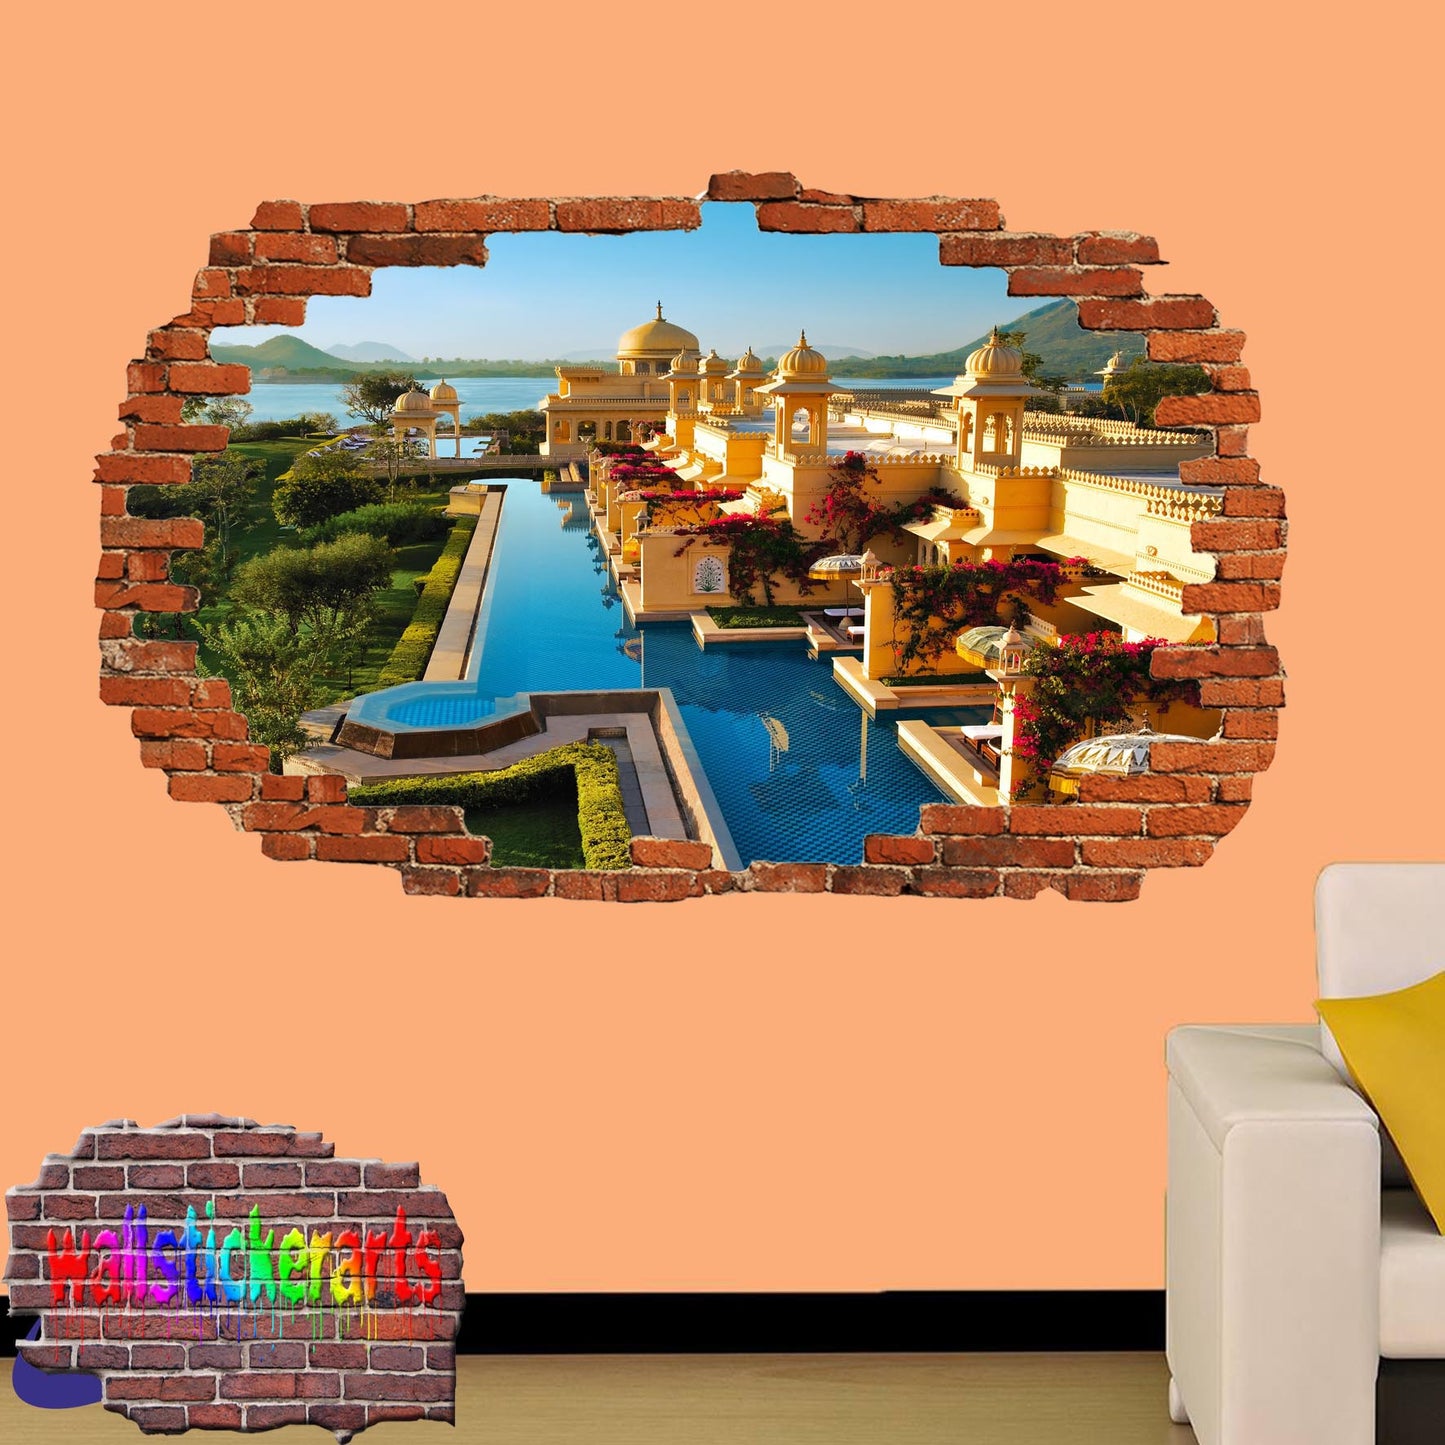 Holiday Villas India 3d Art Smashed Effect Wall Sticker Room Office Nursery Shop Decoration Decal Mural ZE4